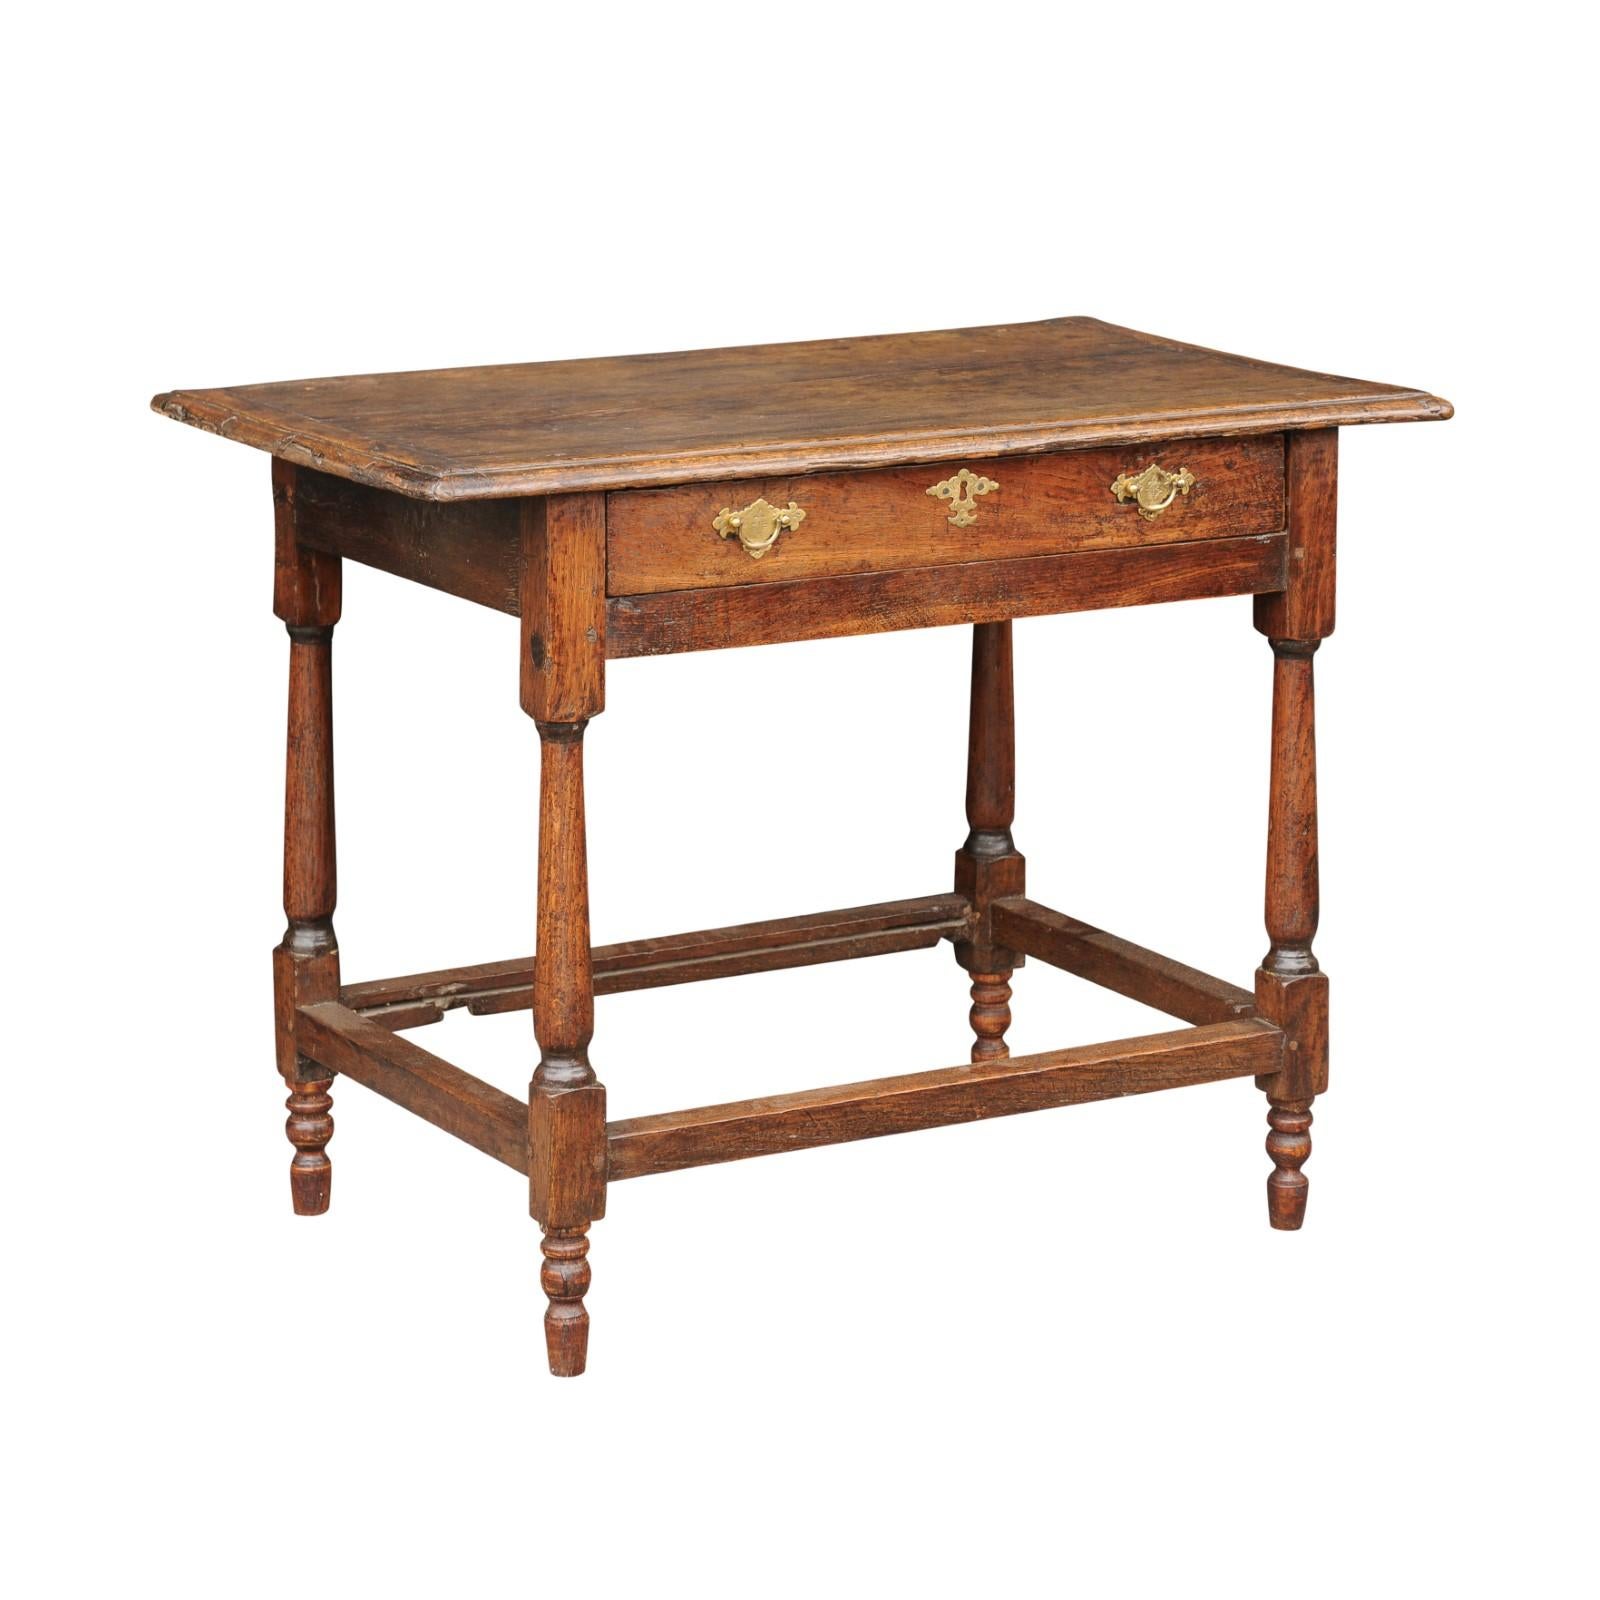 English 1860s Oak Side Table with Drawer, Turned Baluster Legs and Stretcher